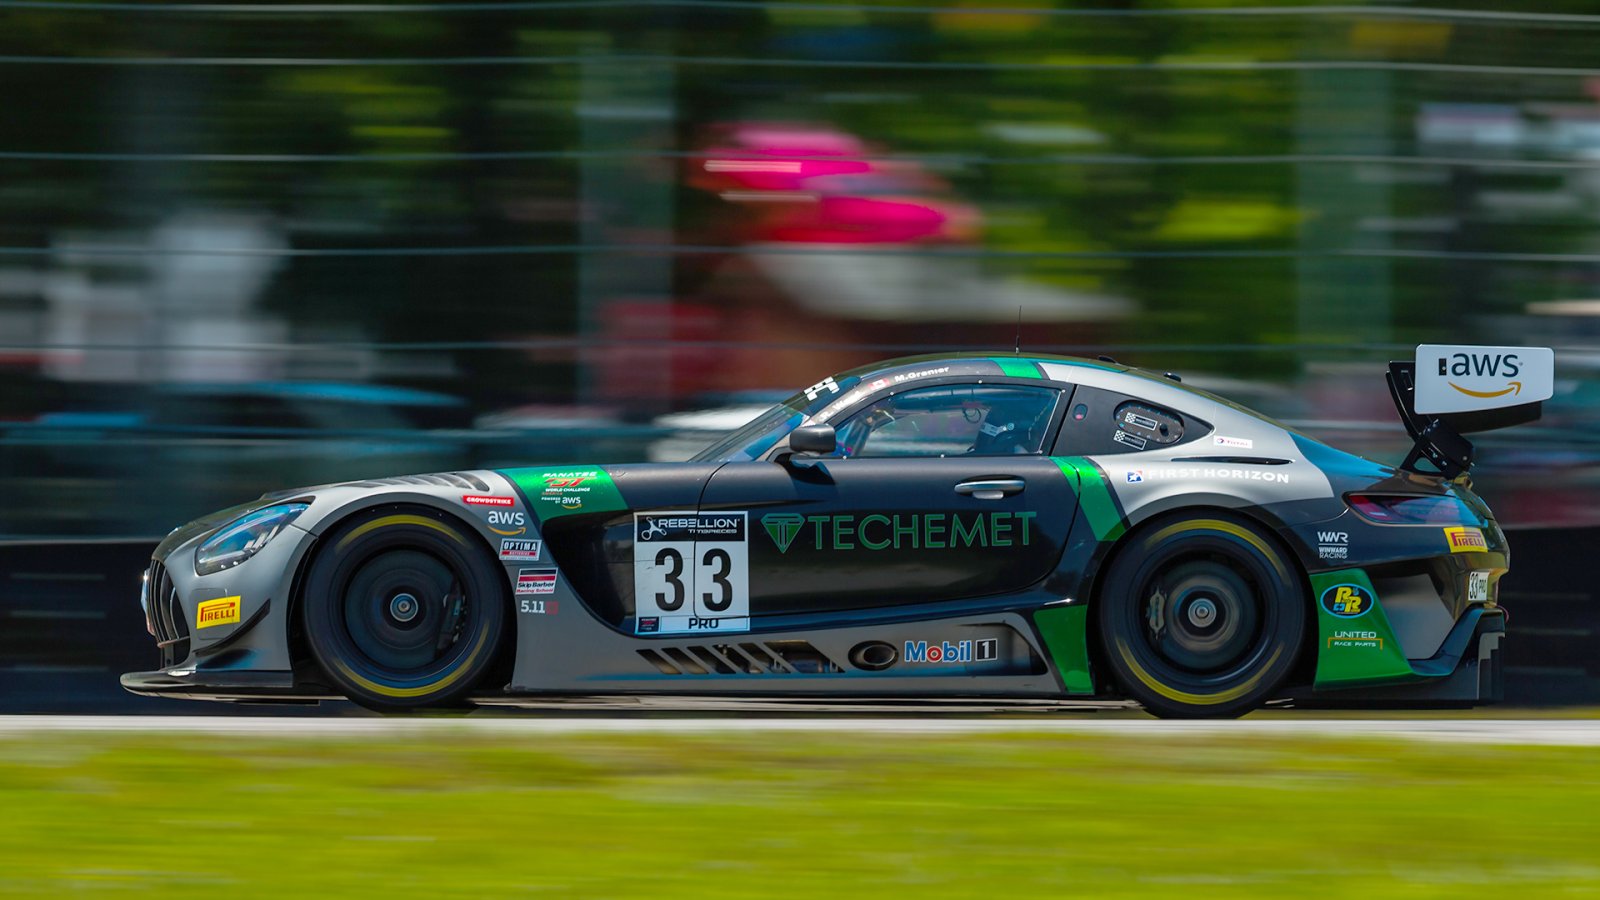 VIR Race 2 Sees Winward, Mercedes-AMG go Flag-to-flag, Compass Racing, Acura Fight a Crowded Pro-Am Field for the Win